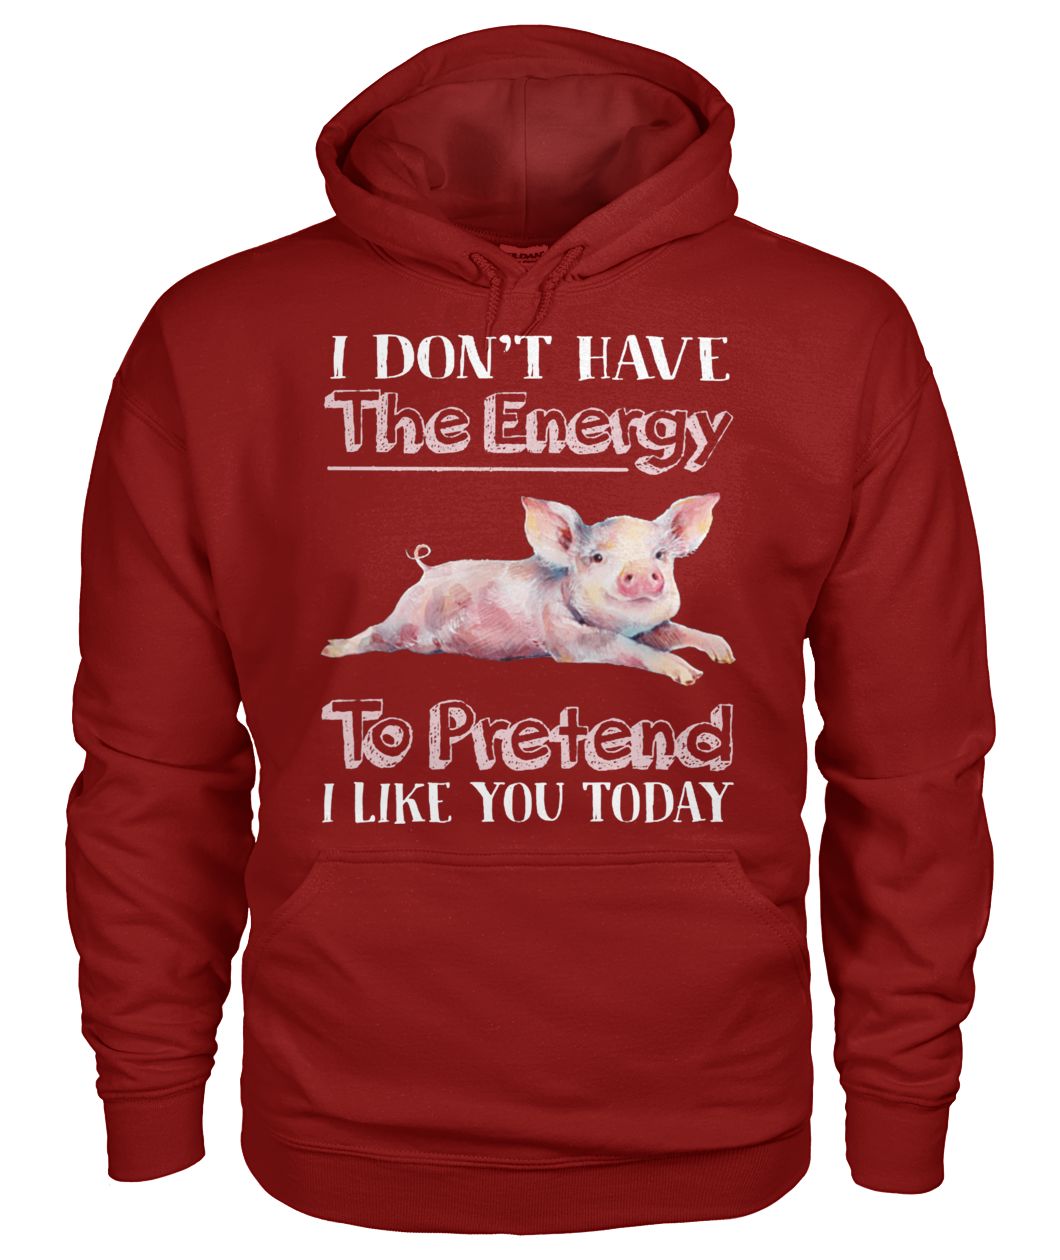 I don't have the energy to pretend I like you today pig gildan hoodie